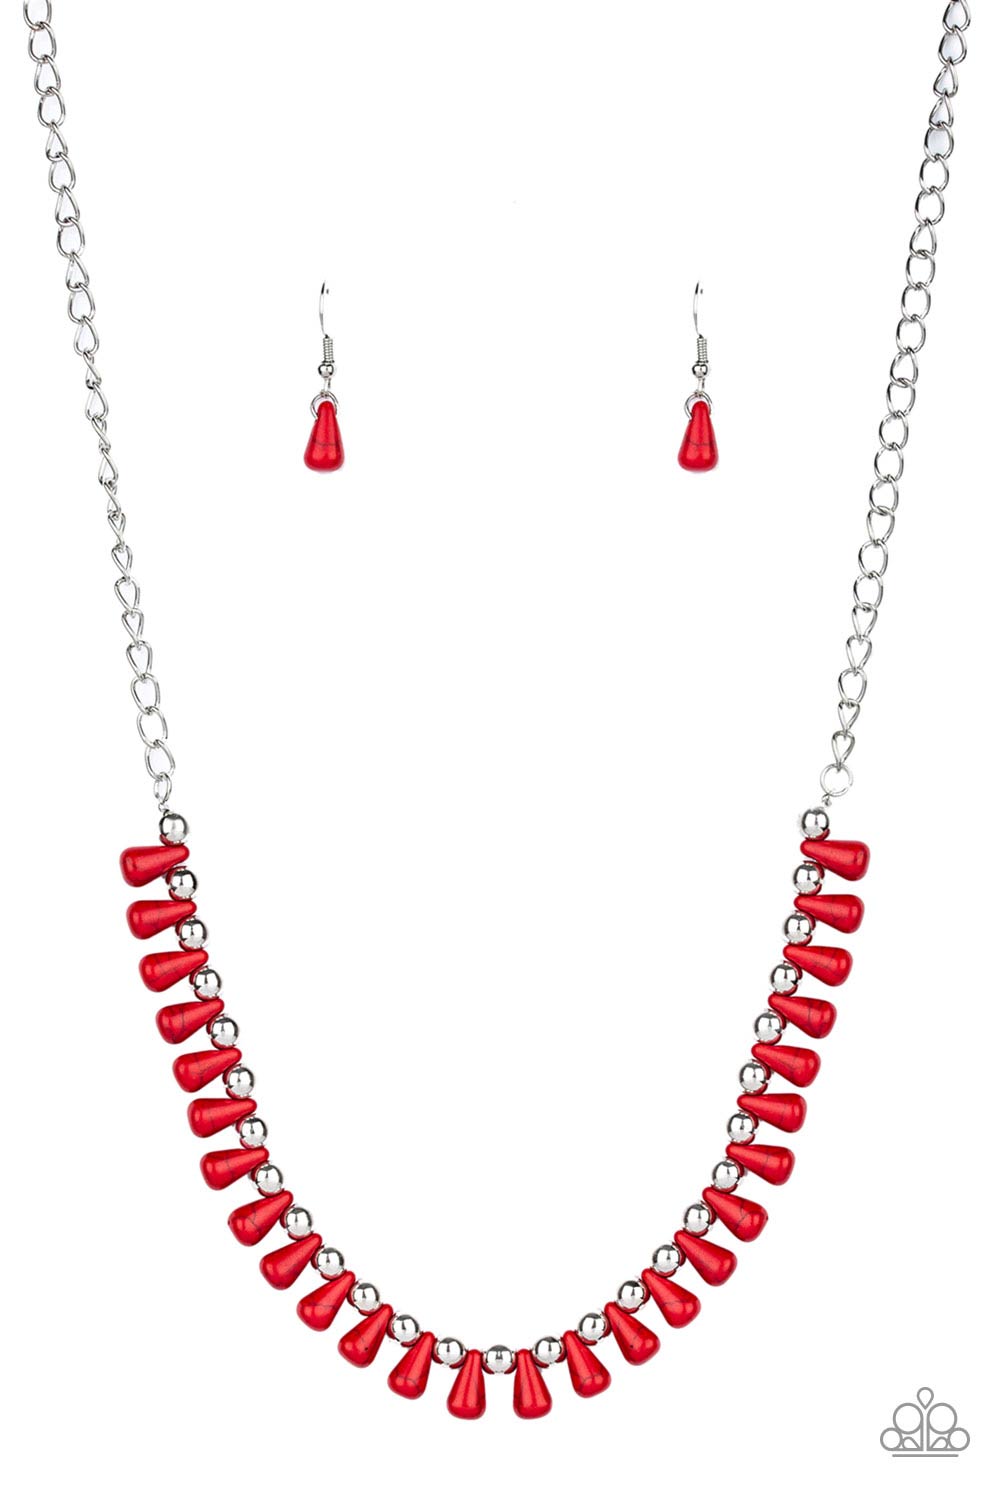 Red teardrop stones and classic silver beads are threaded along an invisible wire. The earthy beads alternate below the collar, creating a wild fringe. Features an adjustable clasp closure.  Sold as one ind